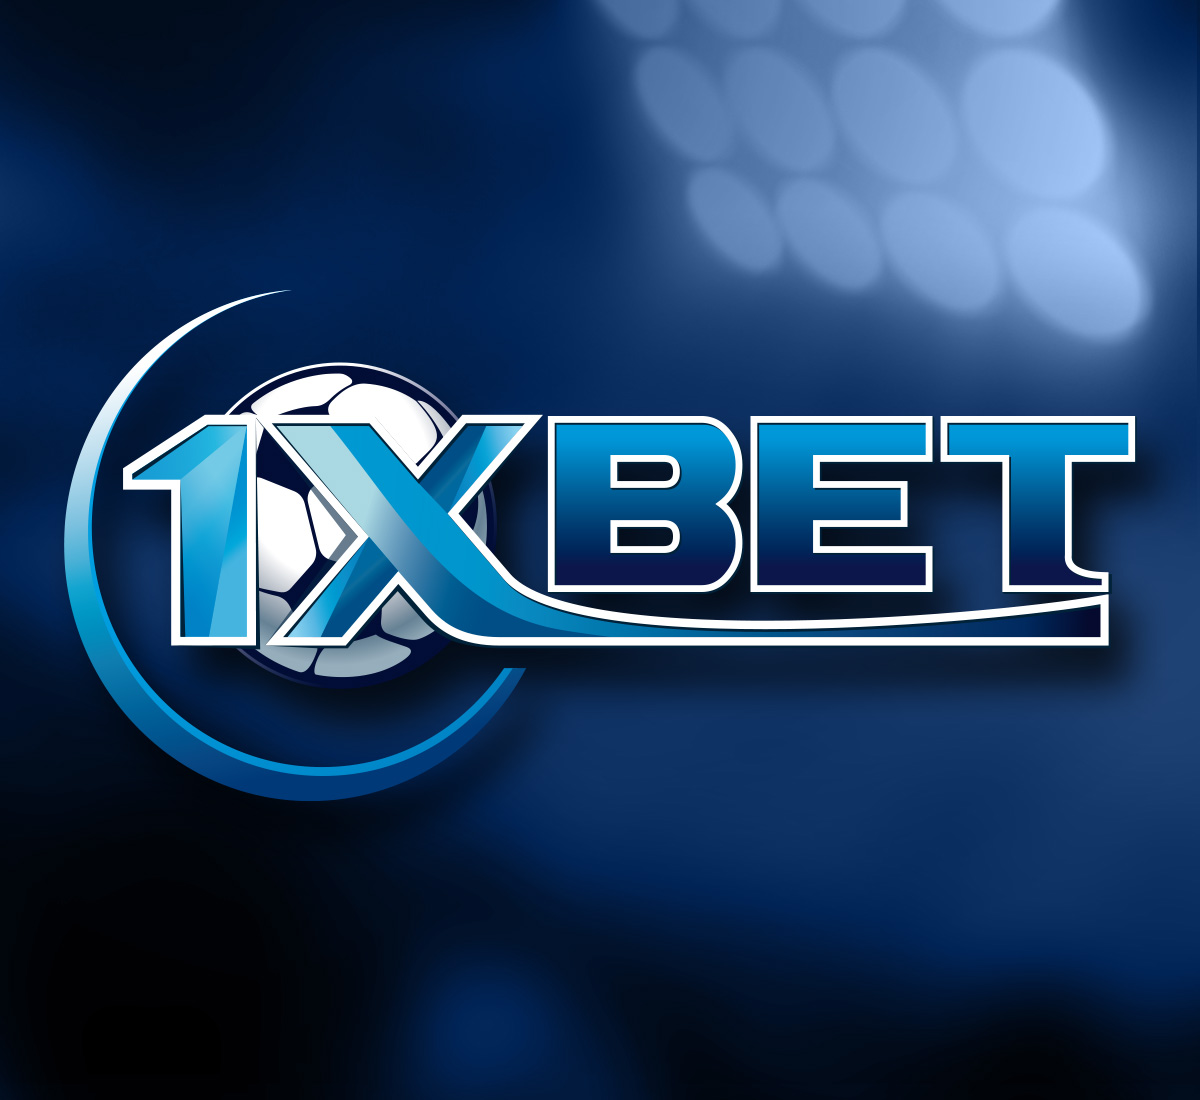 7 Easy Ways To Make 1xbet Faster